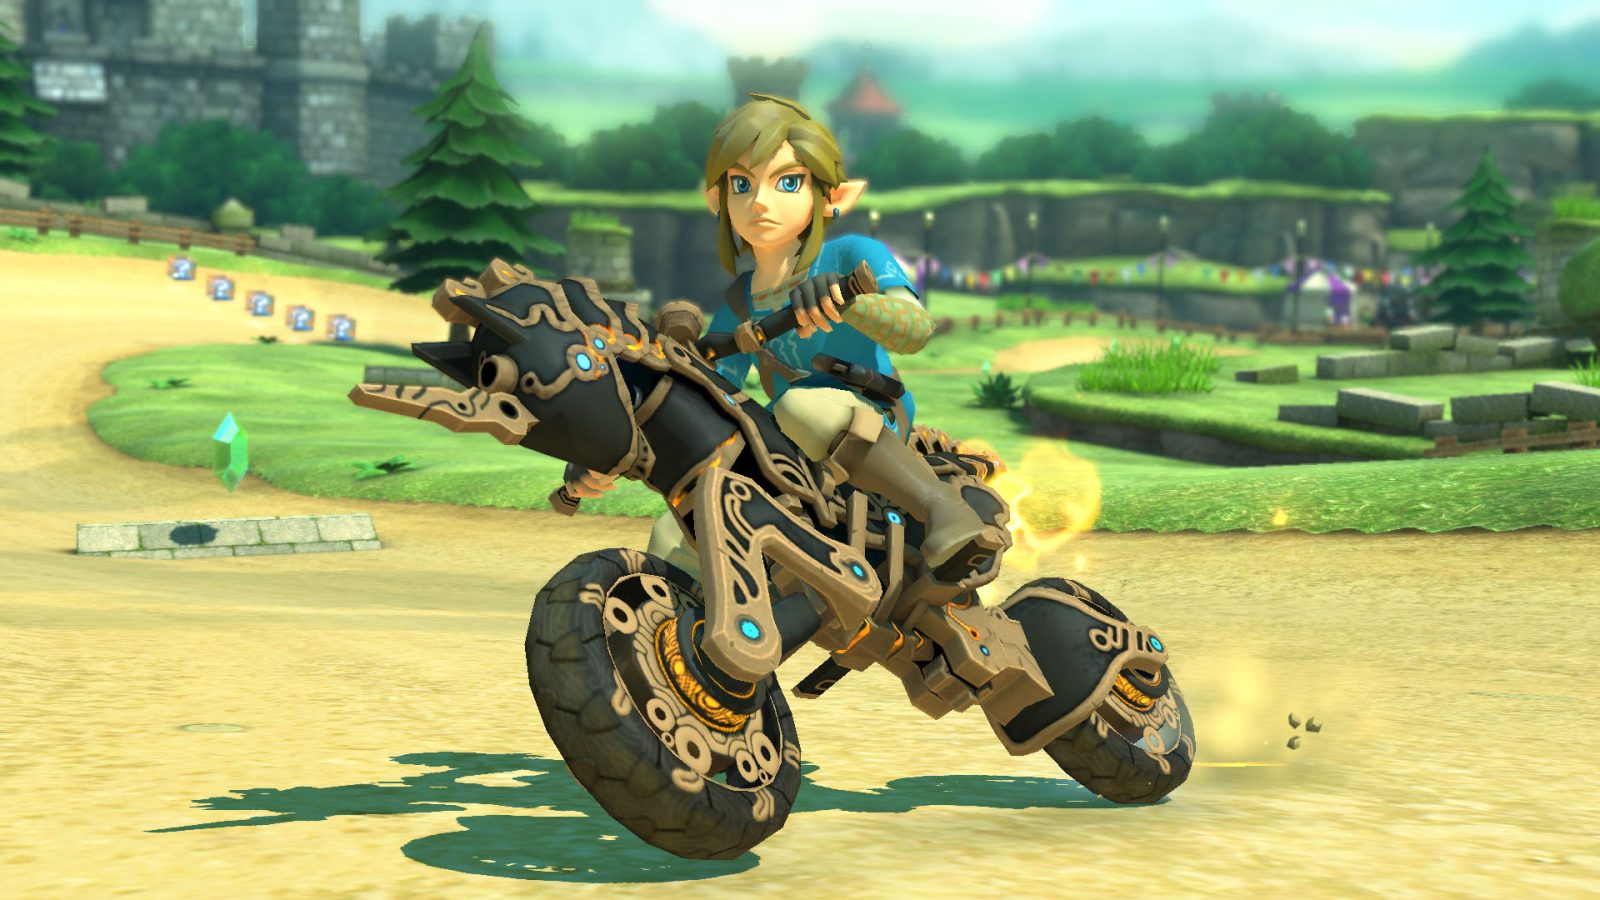 Nintendo Adds Breath Of The Wild Link And Master Cycle To Mario Kart 8 For Free 9to5toys 5041